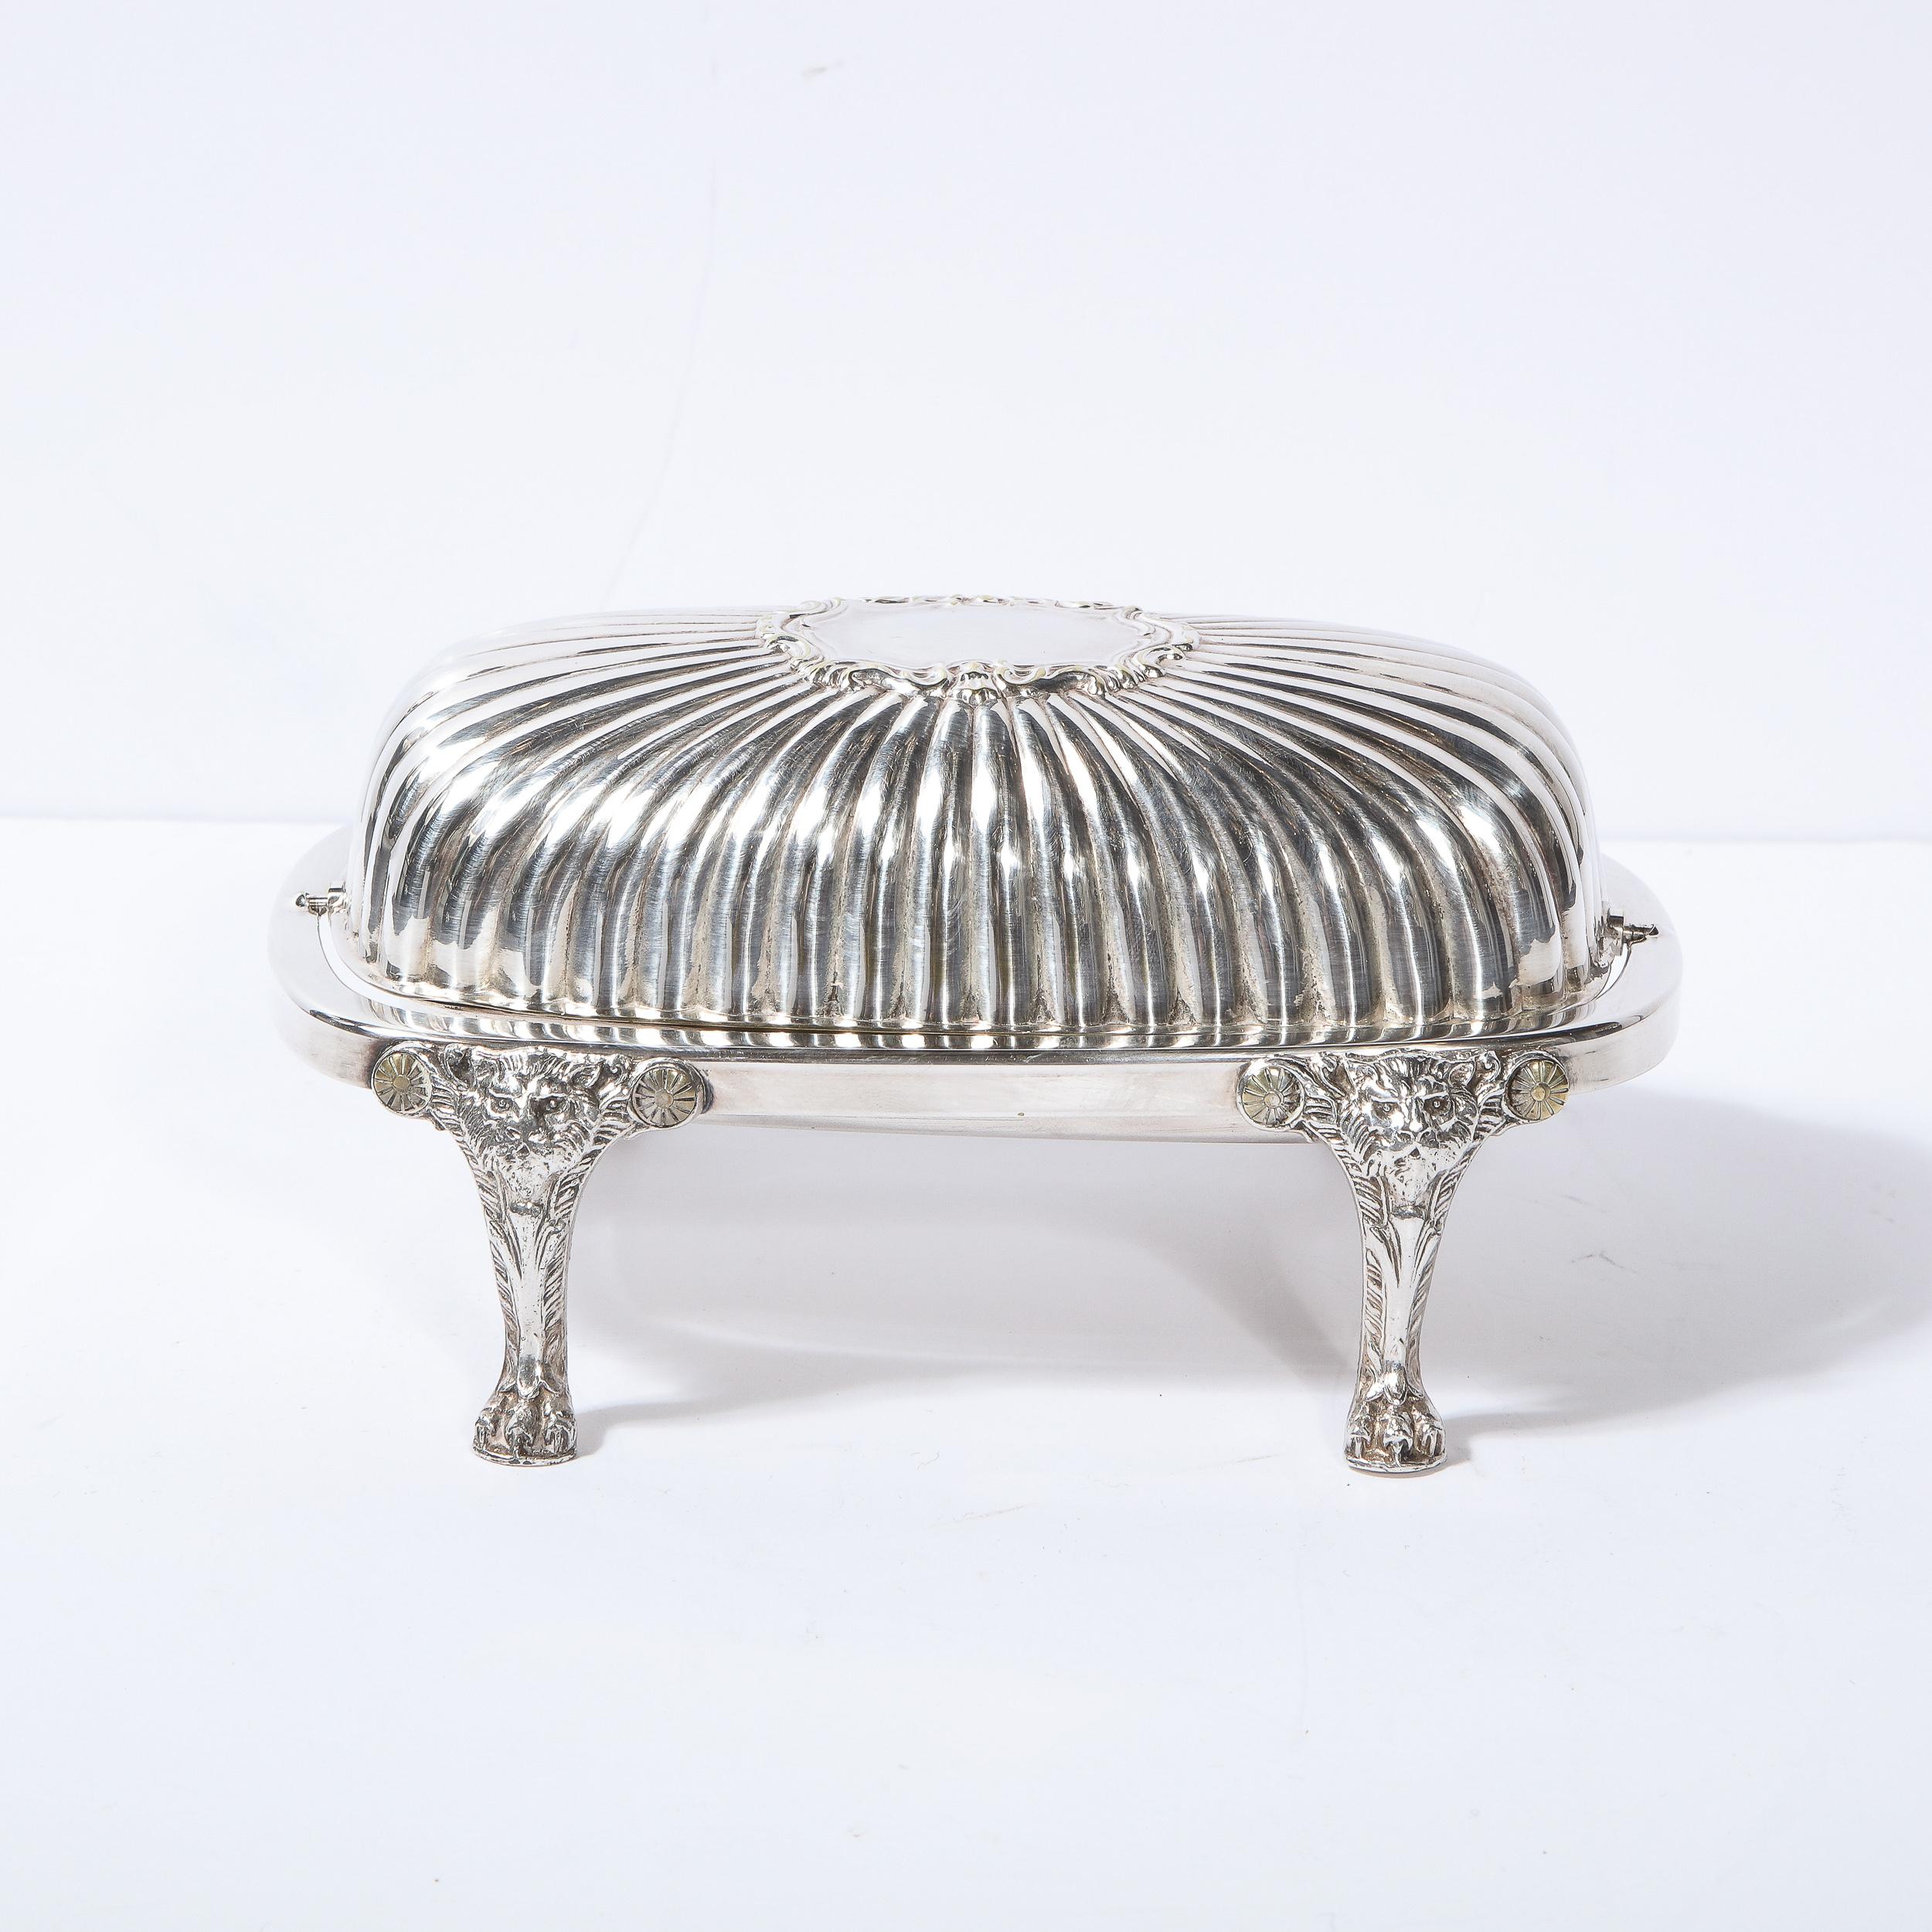 Mid-20th Century Mid-Century Modern Channeled Neoclassical Style Silverplate Butter Dish